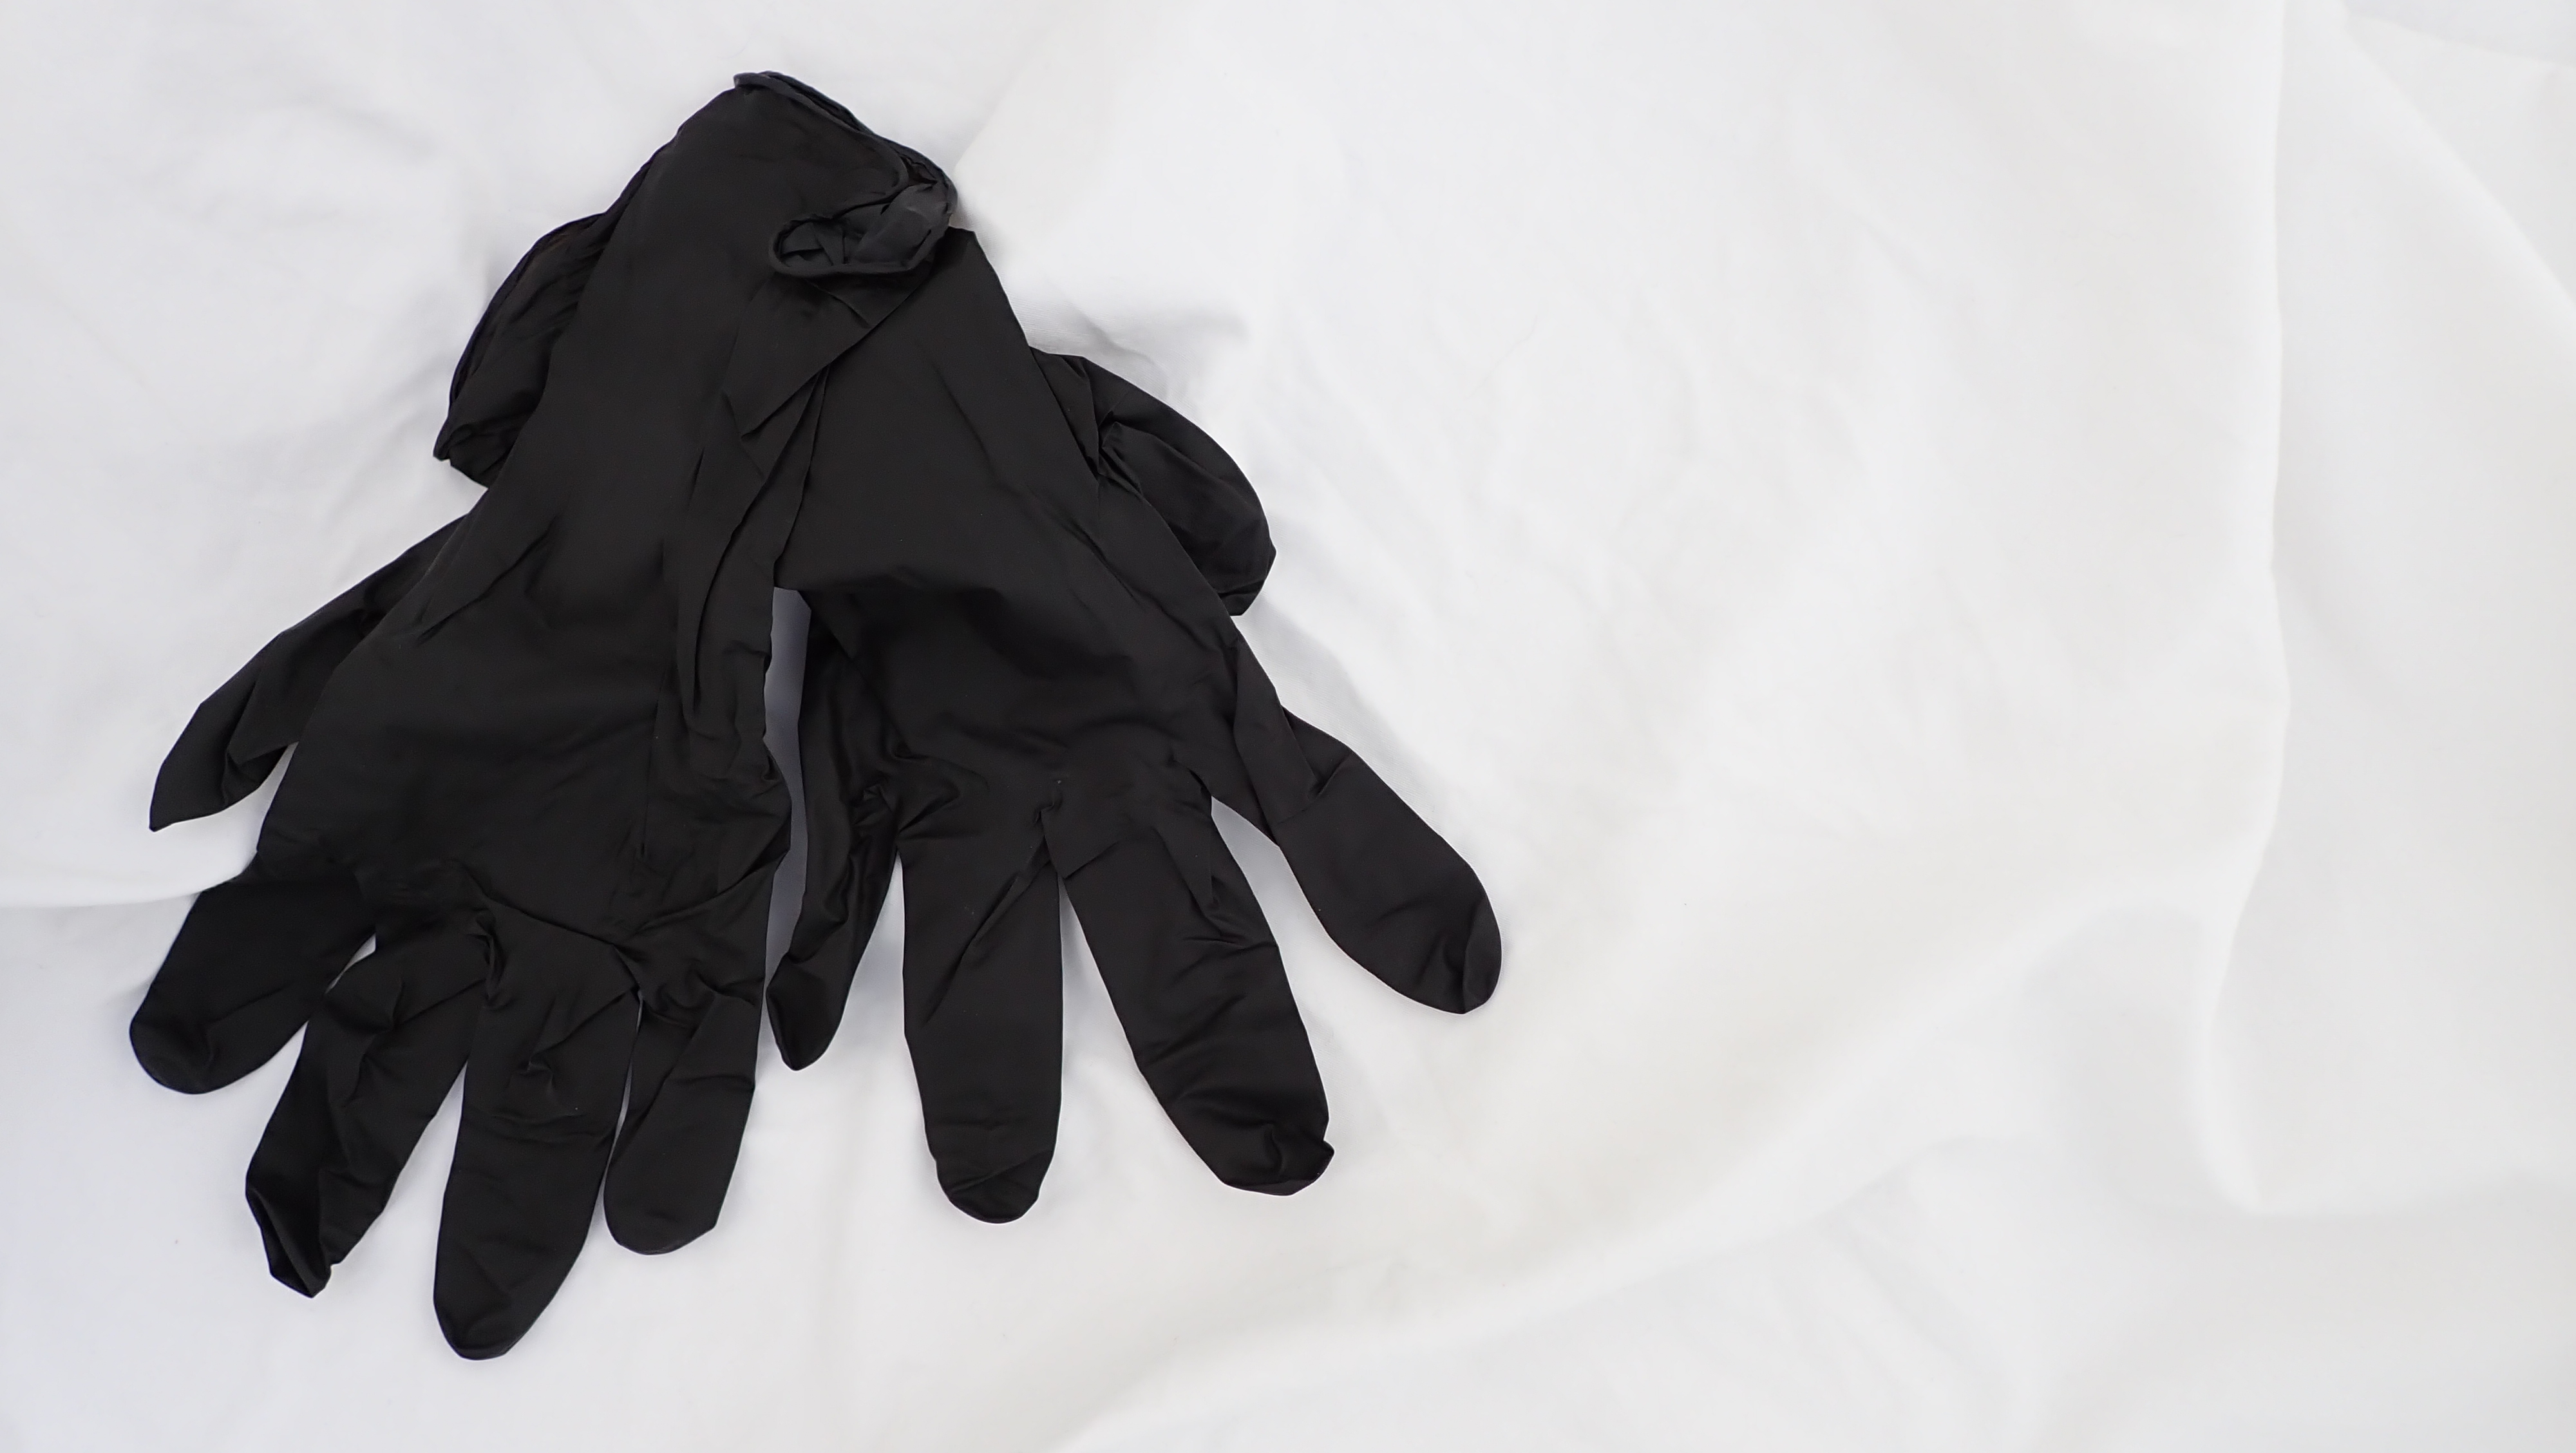 two black exam gloves lying on a rumpled white sheet